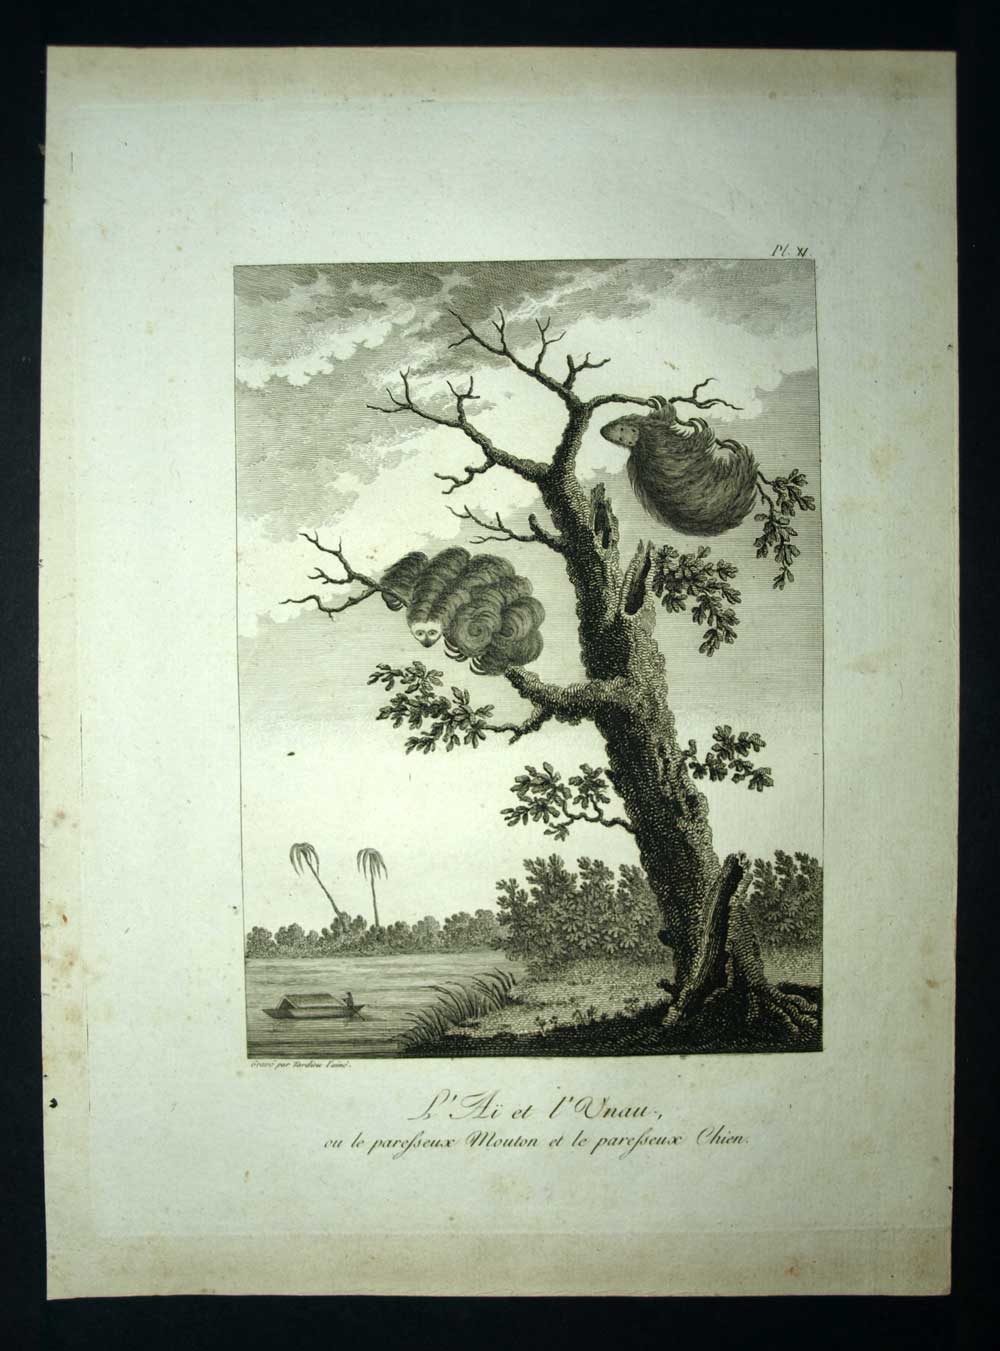 THE SLOTH THE AI and THE UNAU IN SURINAME, DUTCH GUYANA travel engraving 1798 